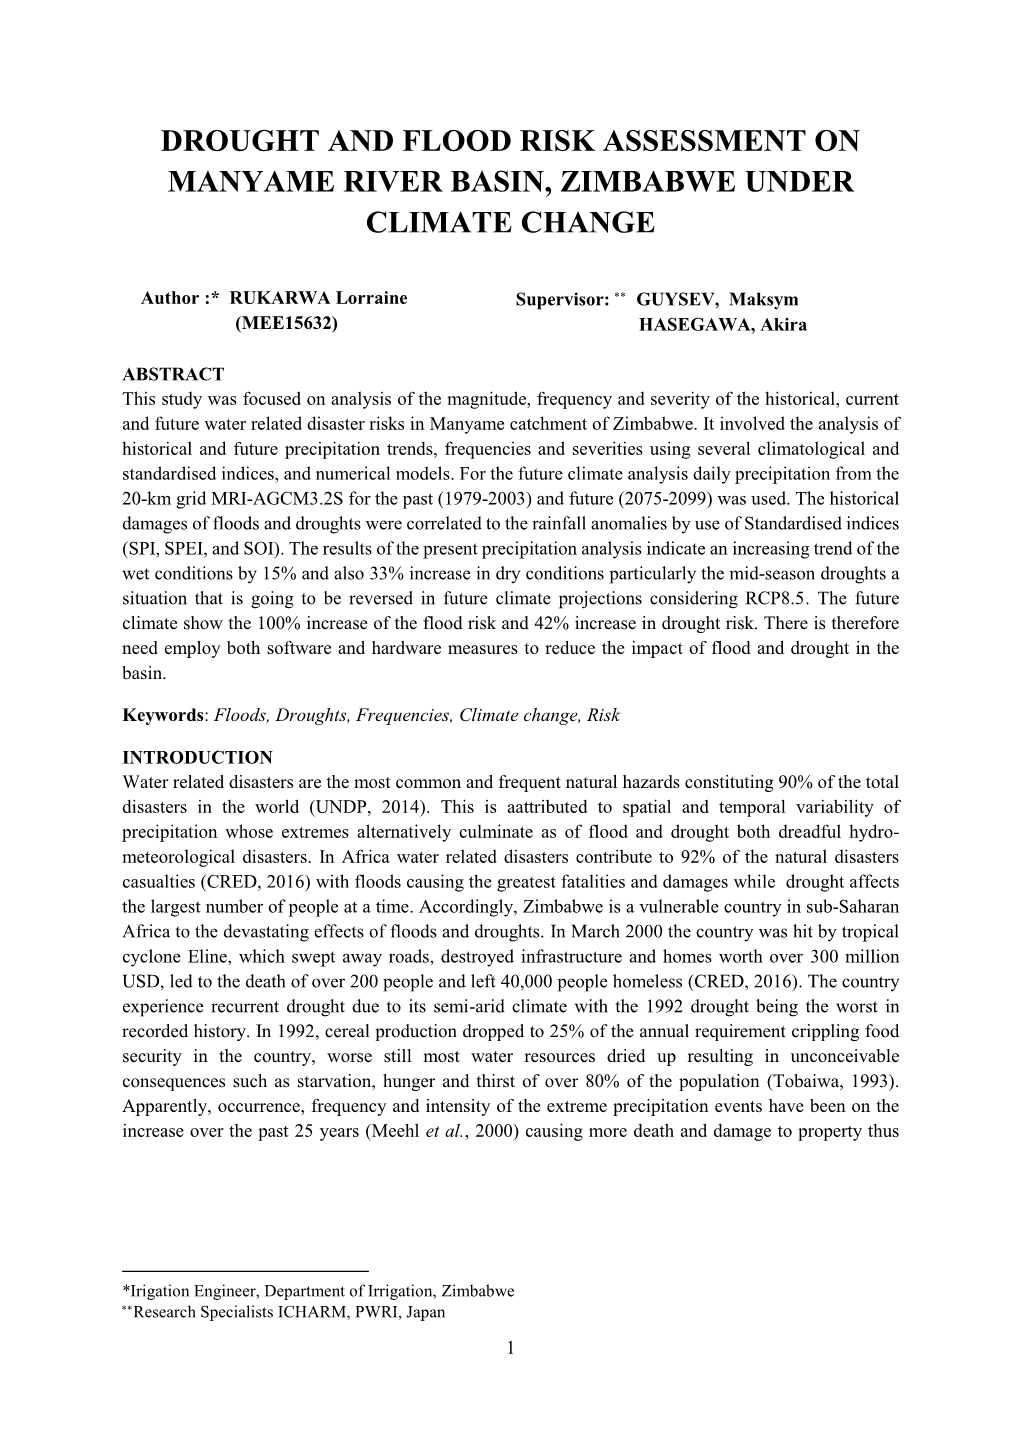 Drought and Flood Risk Assessment on Manyame River Basin, Zimbabwe Under Climate Change